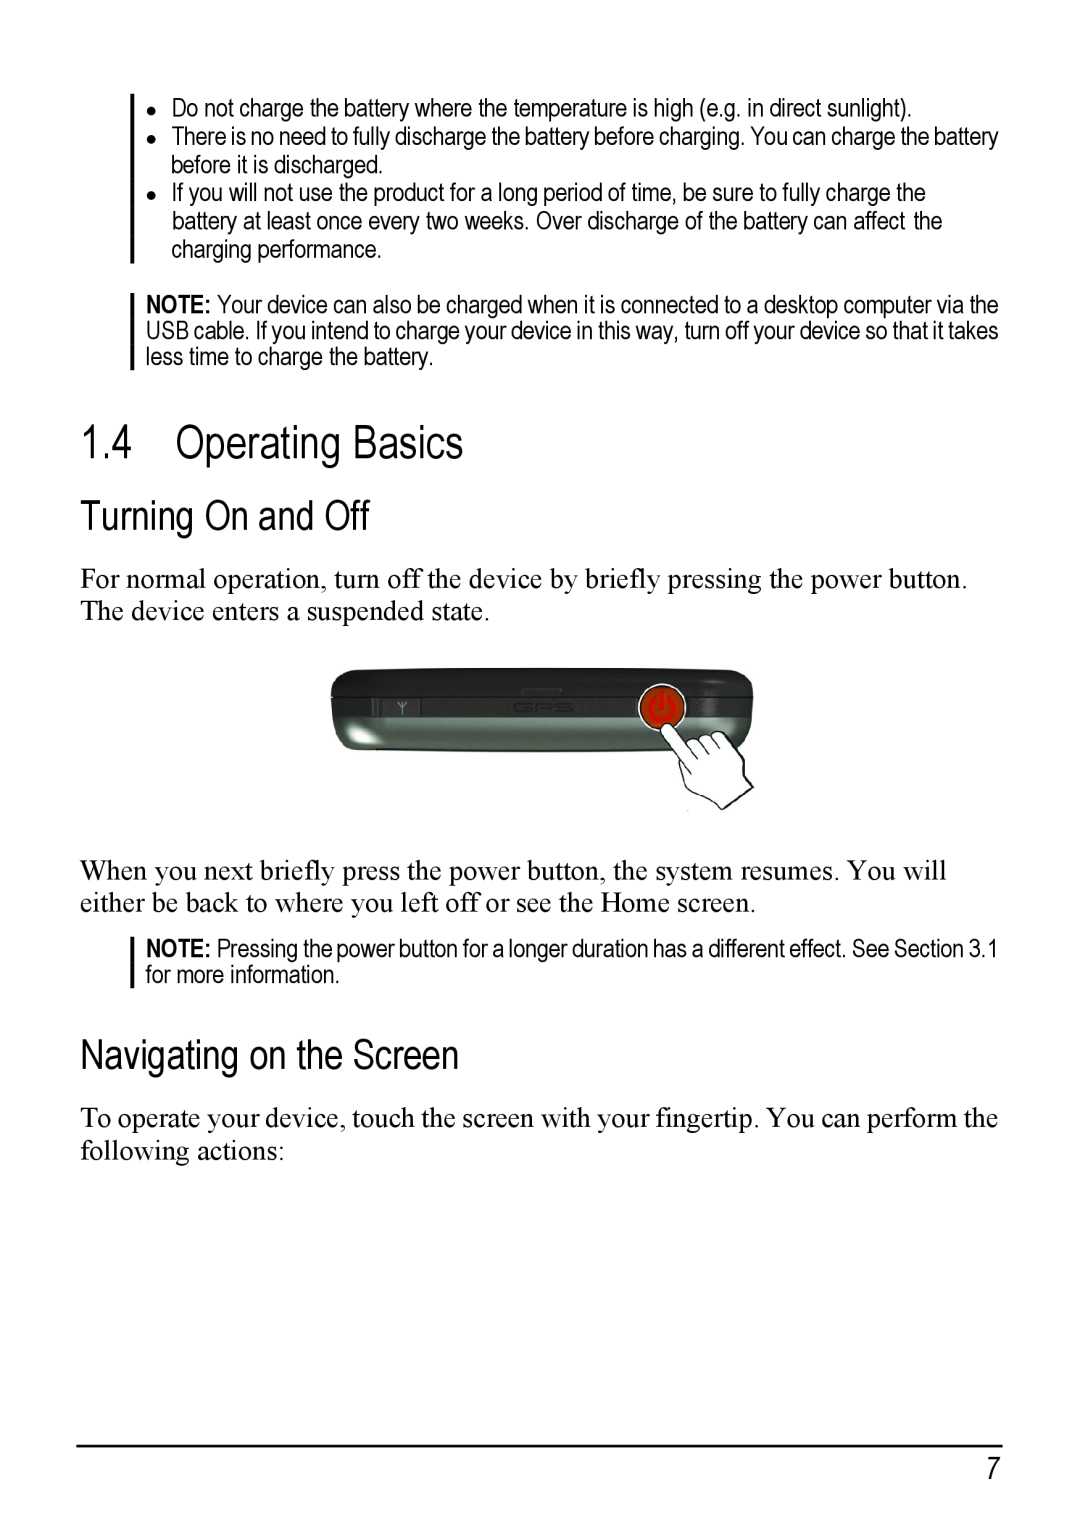 Jabra C220 manual Operating Basics, Turning On and Off, Navigating on the Screen 